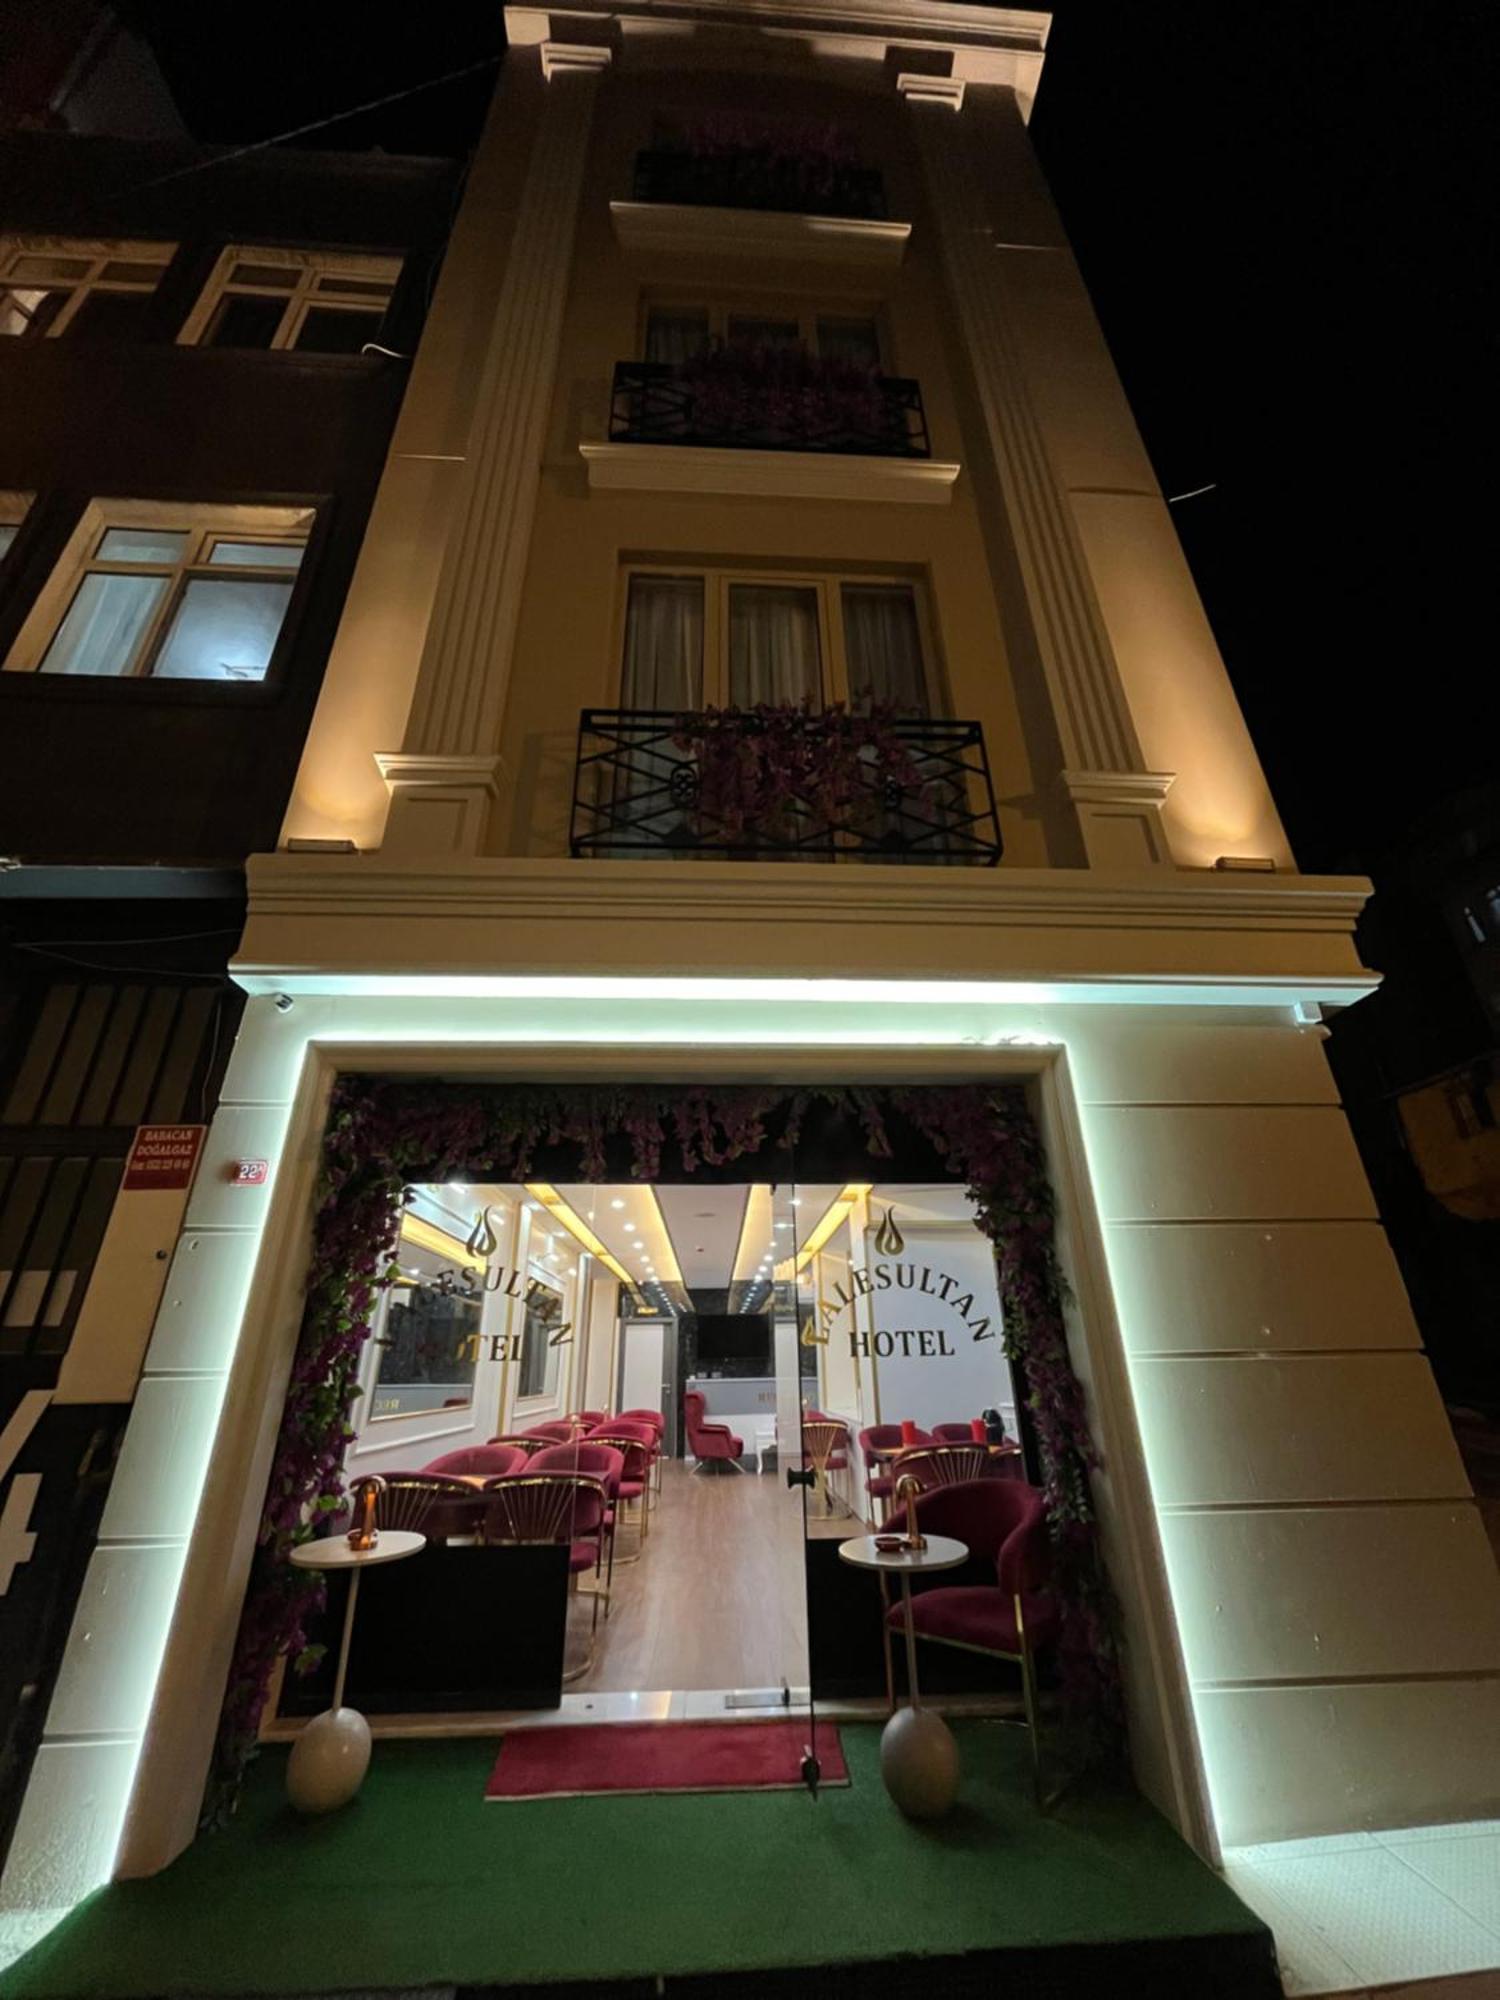 Lale Sultan Hotel Istanbul Exterior photo